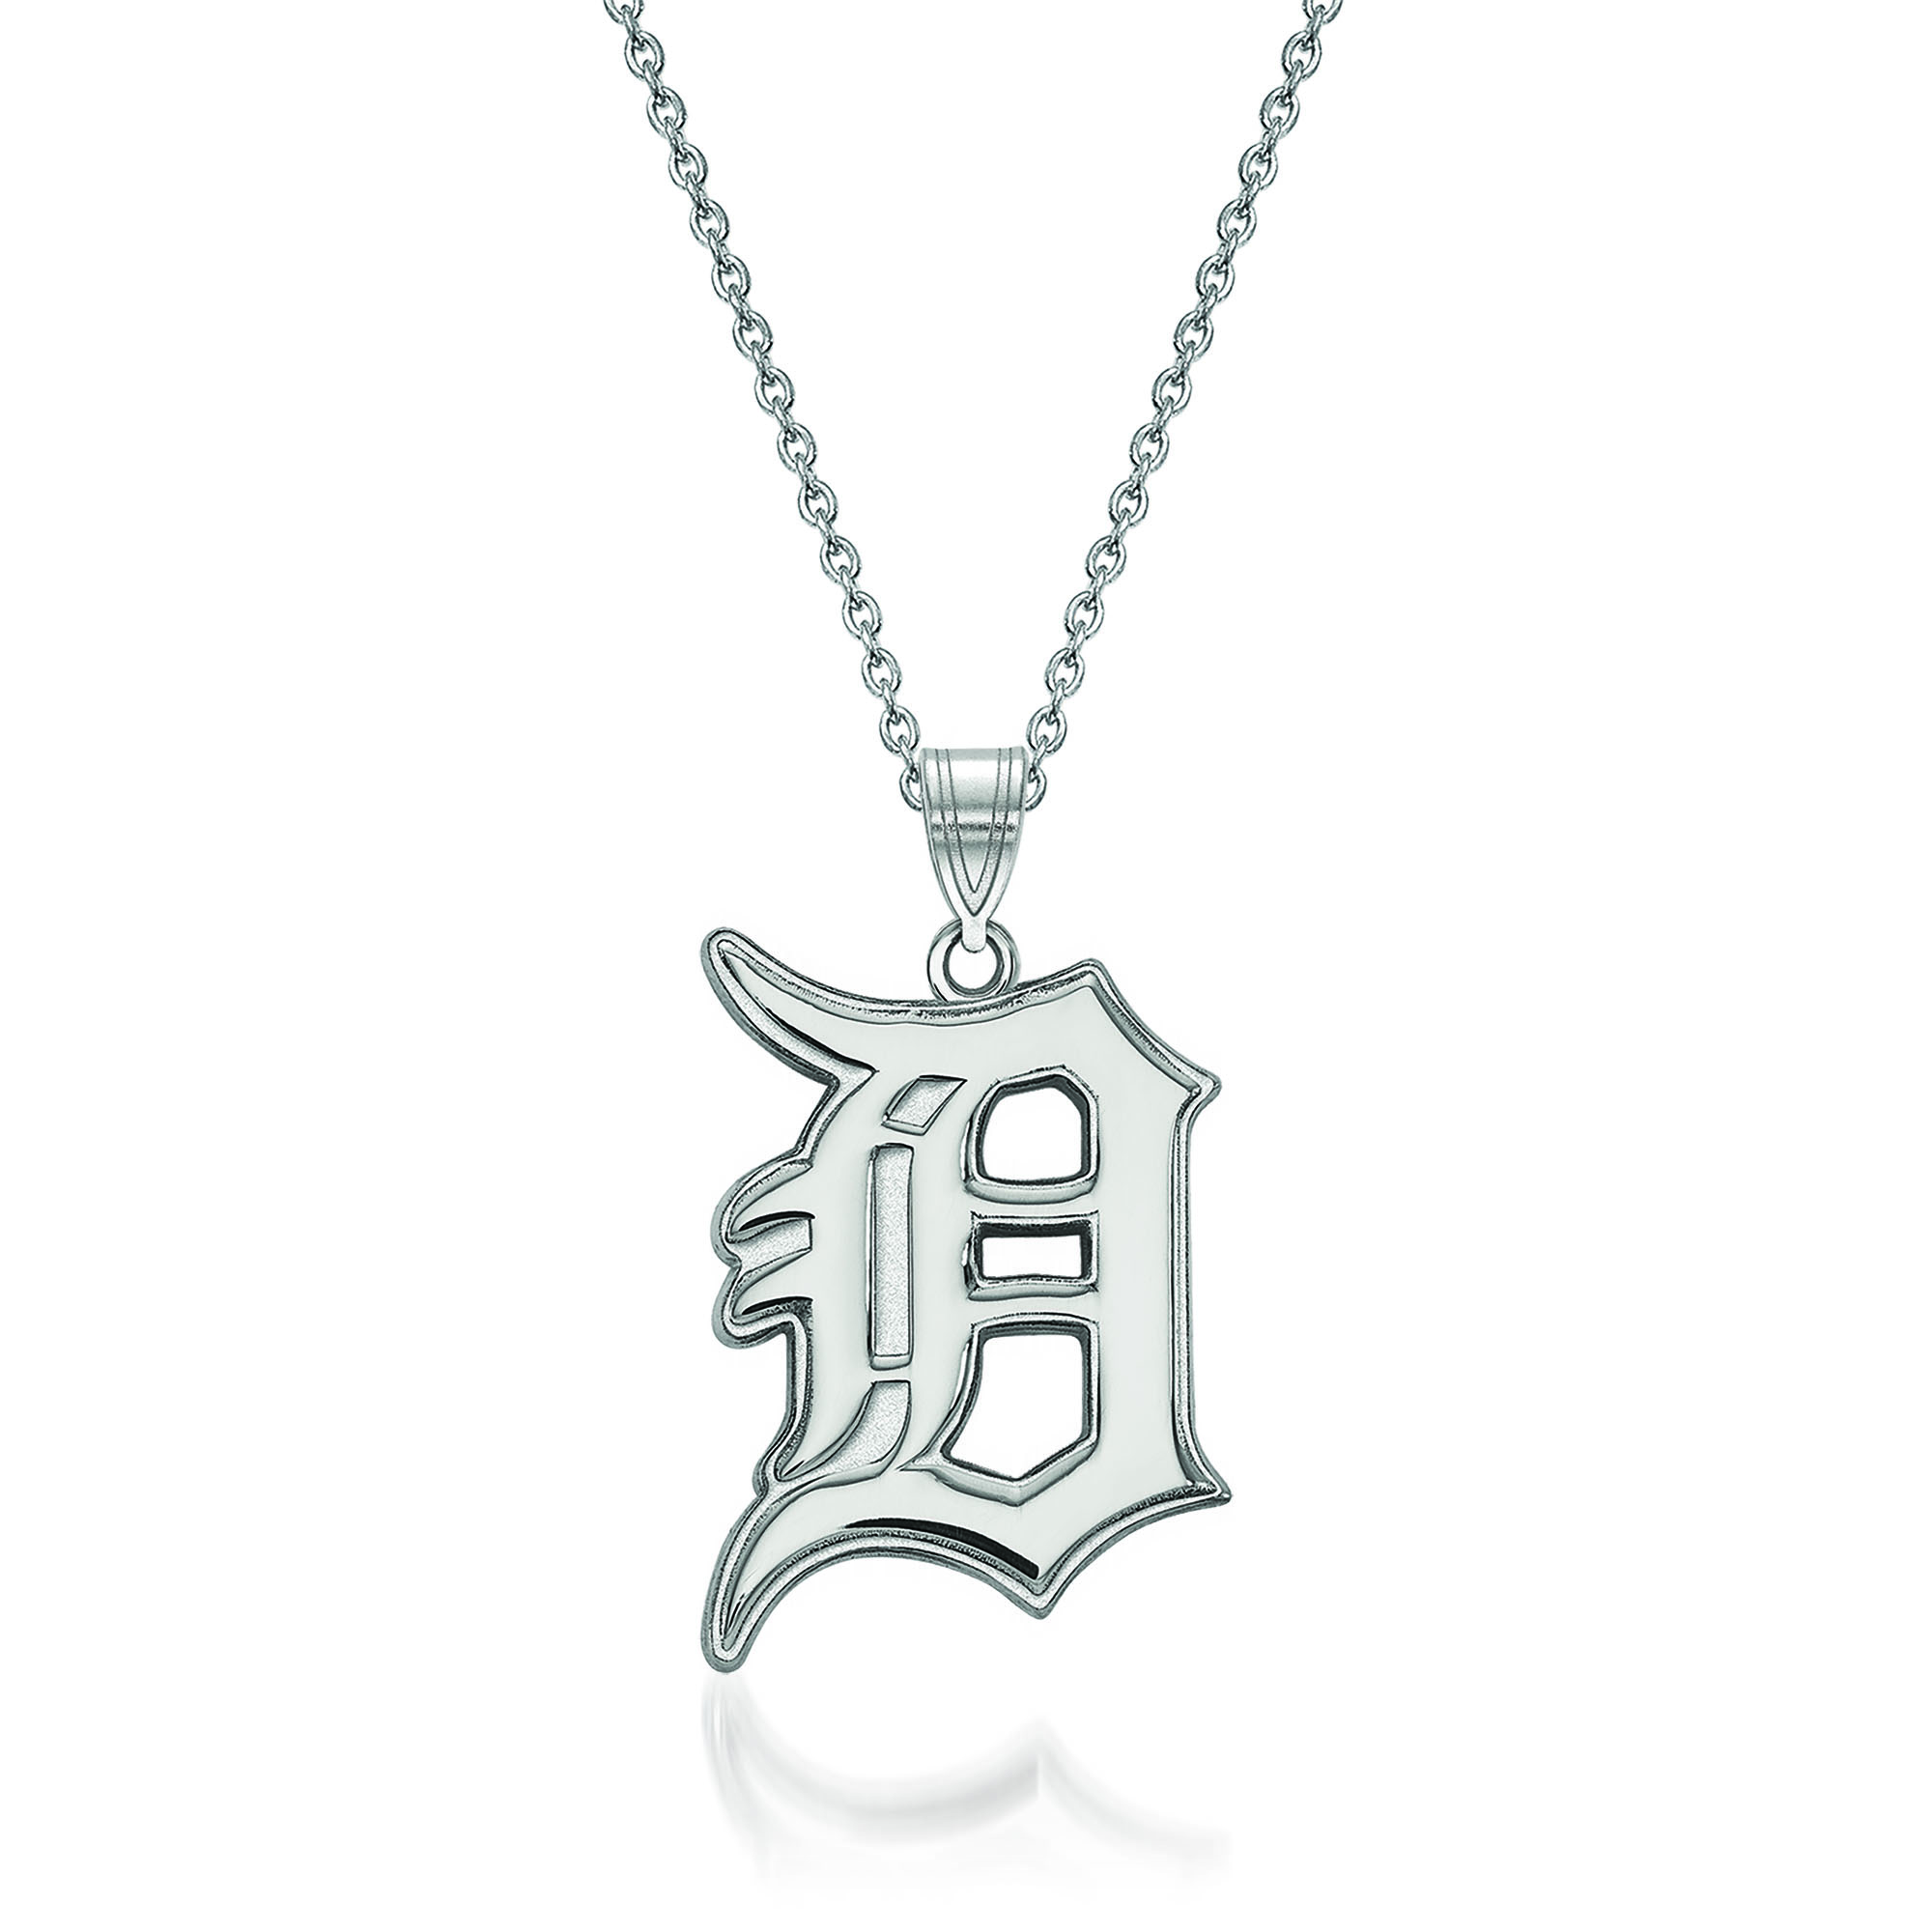 Whats Up With Those Necklaces MLB Players Wear  MedPage Today